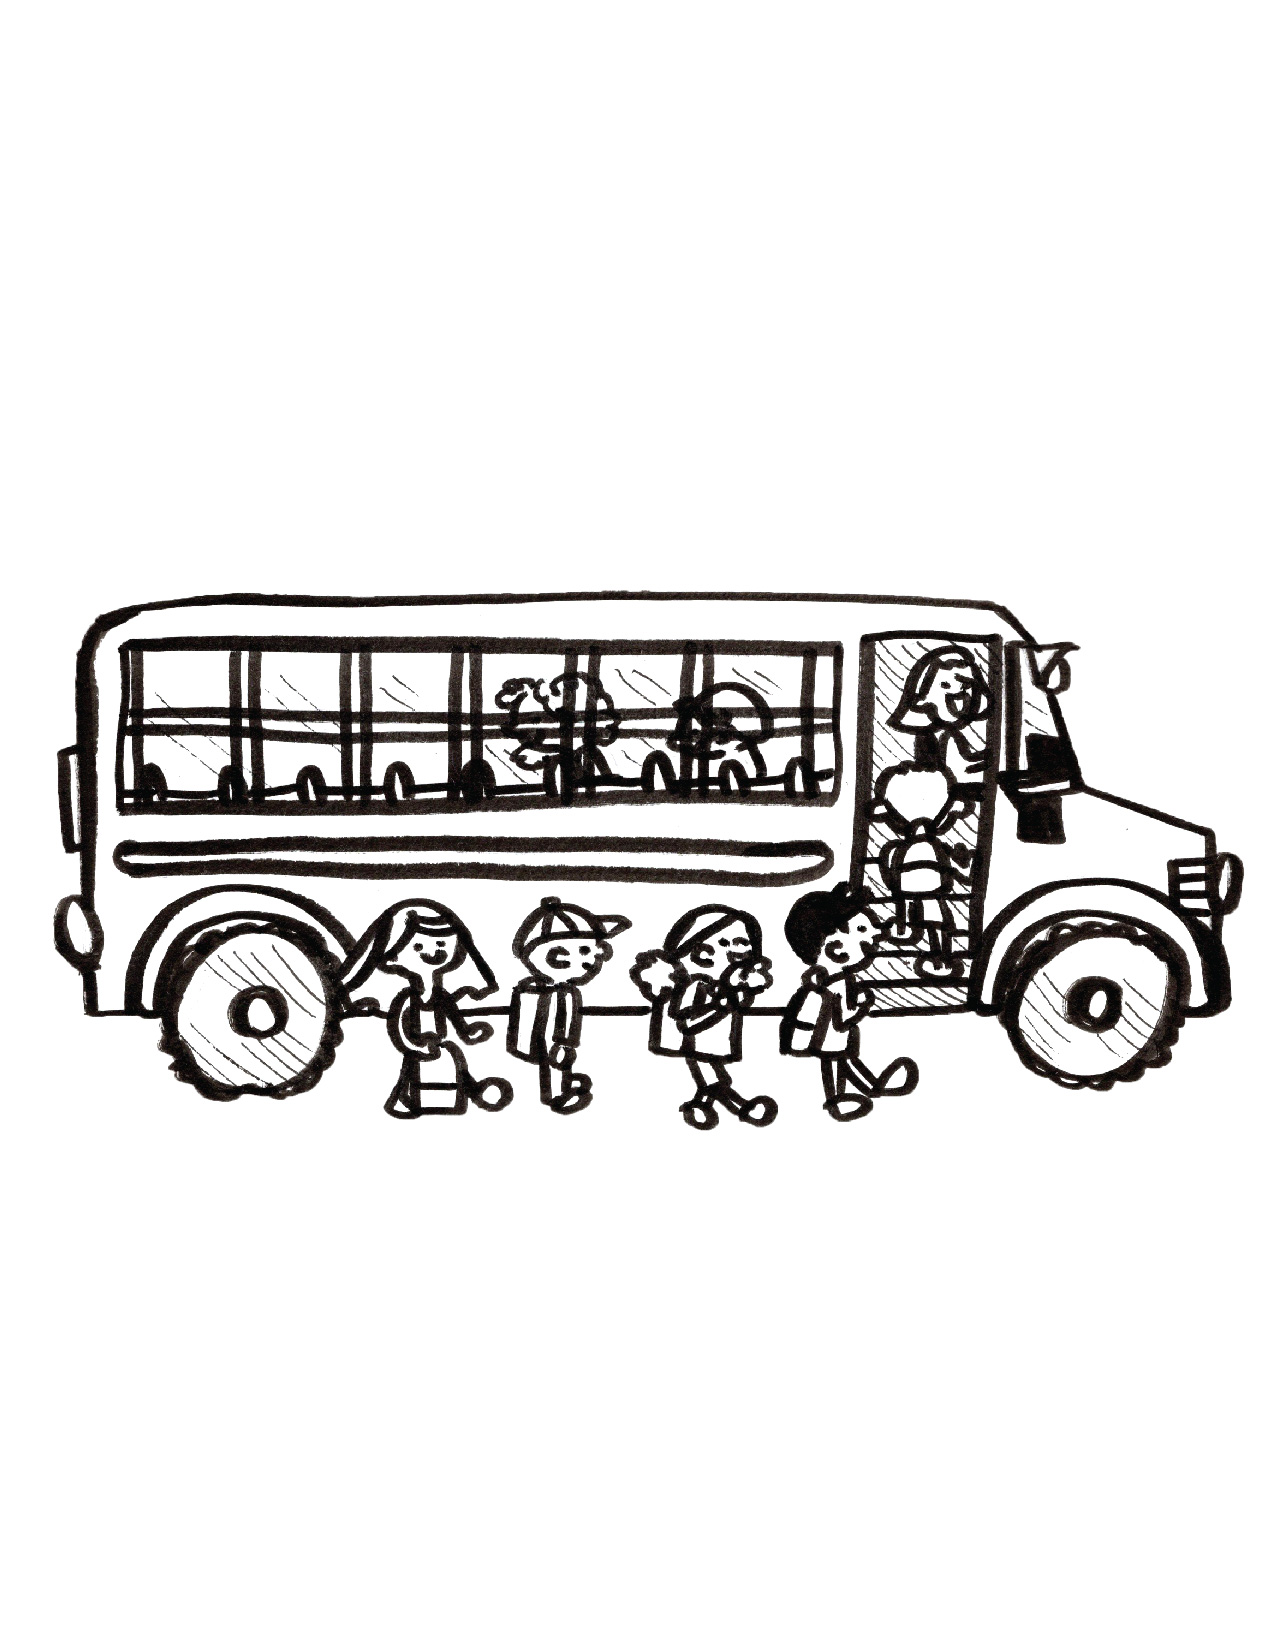 Kids getting on a school bus coloring page